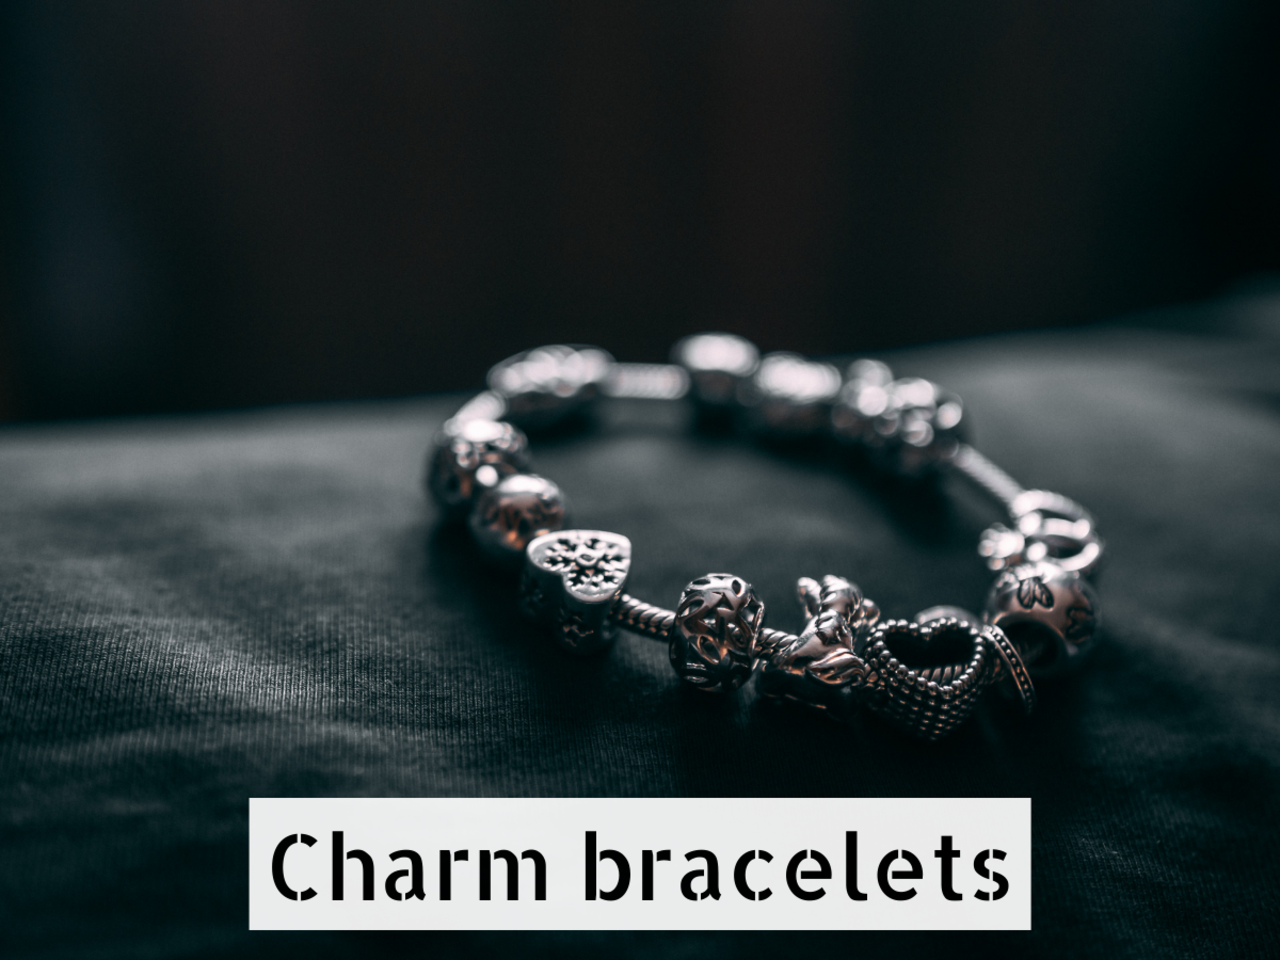 What is a good brand for charm bracelets? - Quora